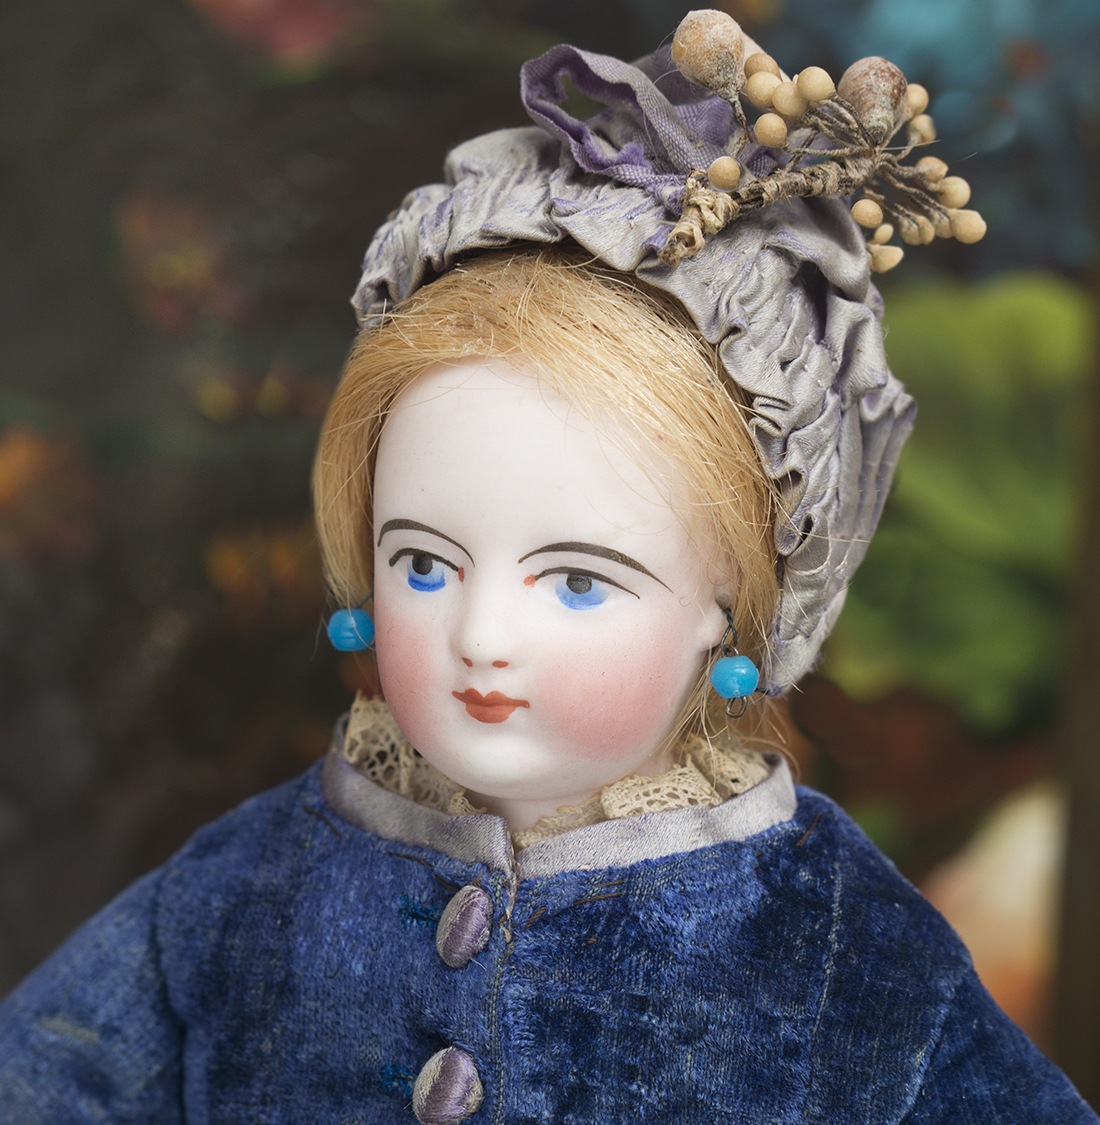 Small FG doll with painted eyes